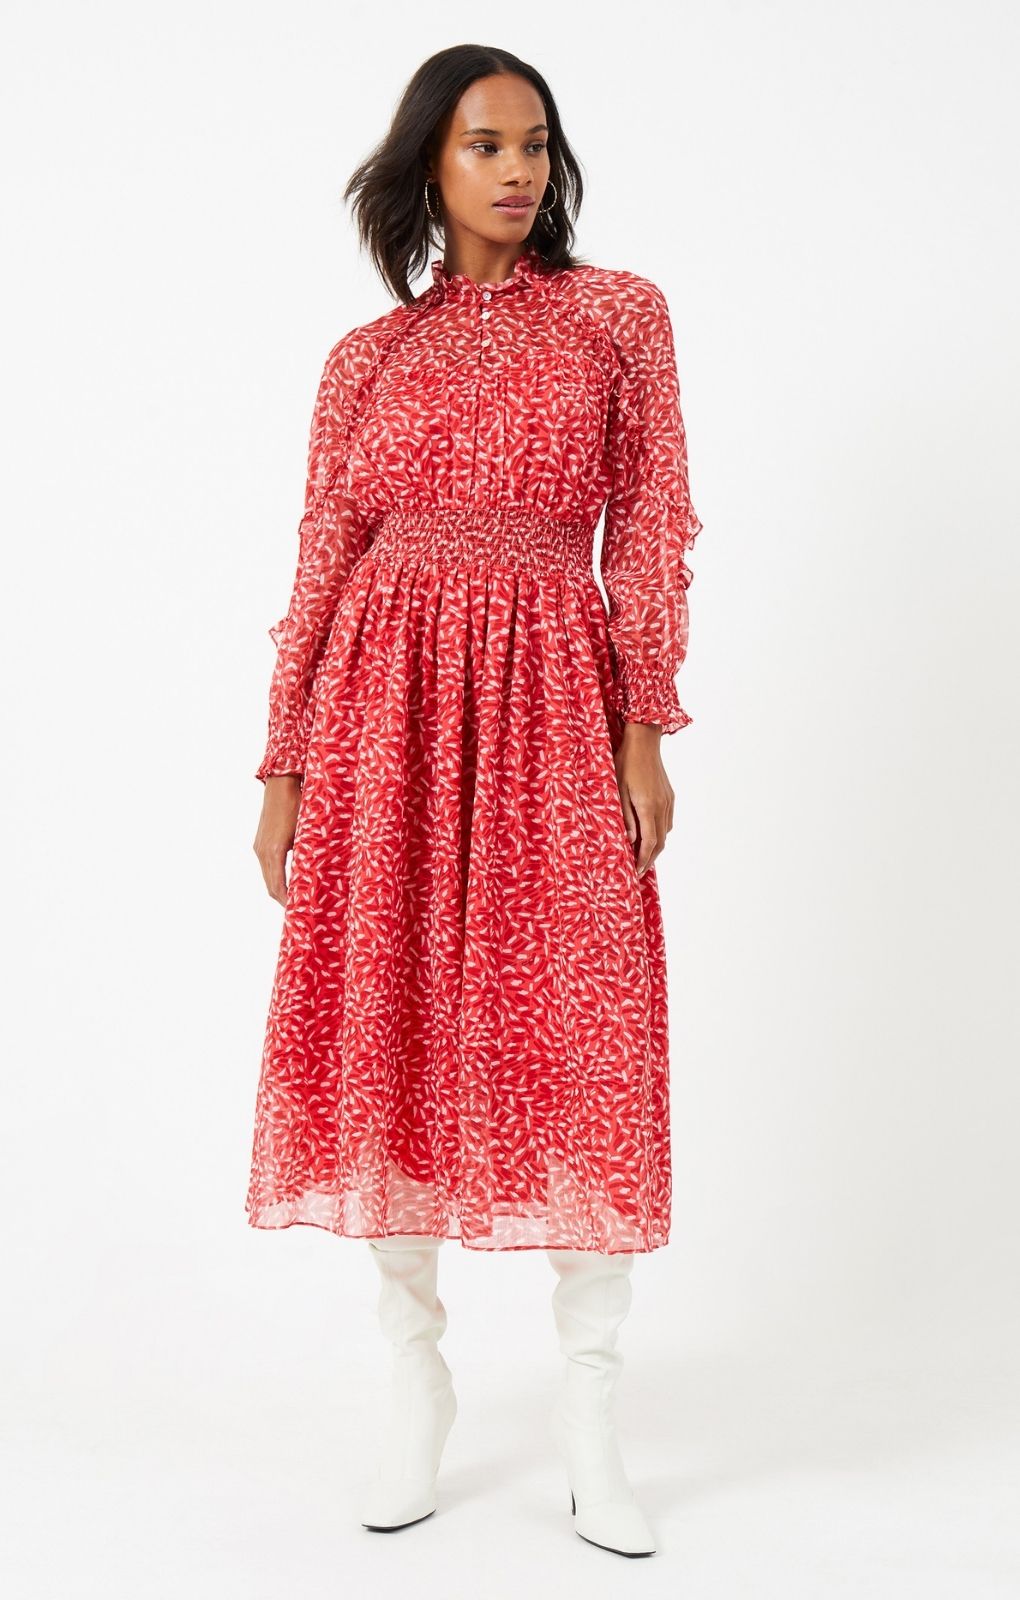 French Connection Hallie Midi Dress in Bittersweet product image